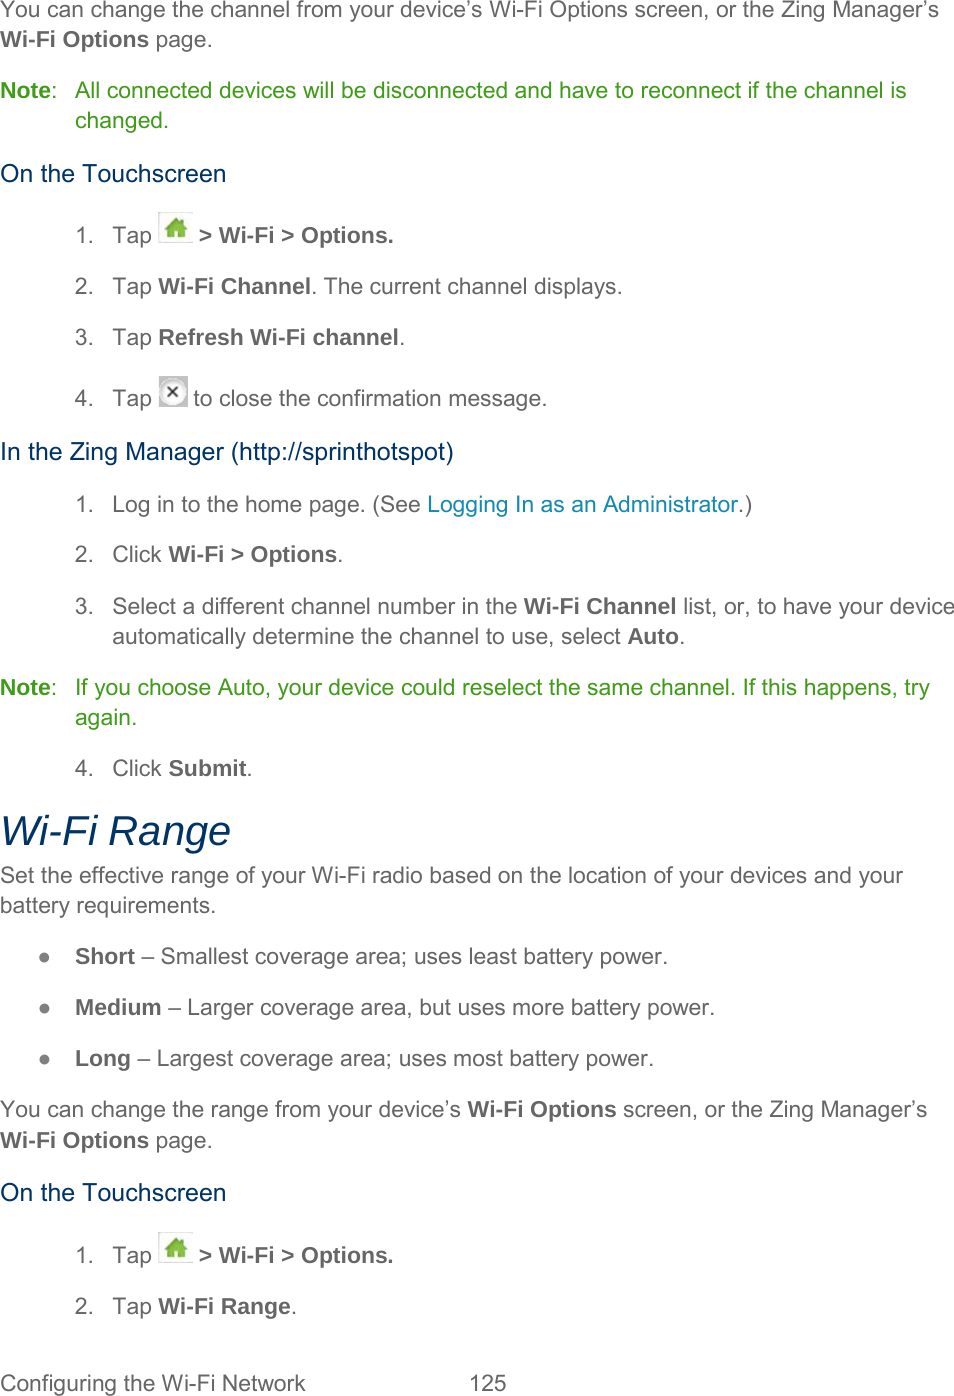 You can change the channel from your device’s Wi-Fi Options screen, or the Zing Manager’s Wi-Fi Options page. Note:  All connected devices will be disconnected and have to reconnect if the channel is changed. On the Touchscreen 1. Tap  &gt; Wi-Fi &gt; Options. 2. Tap Wi-Fi Channel. The current channel displays. 3. Tap Refresh Wi-Fi channel. 4. Tap   to close the confirmation message. In the Zing Manager (http://sprinthotspot) 1. Log in to the home page. (See Logging In as an Administrator.) 2. Click Wi-Fi &gt; Options. 3.  Select a different channel number in the Wi-Fi Channel list, or, to have your device automatically determine the channel to use, select Auto. Note:  If you choose Auto, your device could reselect the same channel. If this happens, try again. 4. Click Submit. Wi-Fi Range Set the effective range of your Wi-Fi radio based on the location of your devices and your battery requirements. ●  Short – Smallest coverage area; uses least battery power. ●  Medium – Larger coverage area, but uses more battery power. ●  Long – Largest coverage area; uses most battery power. You can change the range from your device’s Wi-Fi Options screen, or the Zing Manager’s Wi-Fi Options page.  On the Touchscreen 1. Tap  &gt; Wi-Fi &gt; Options. 2. Tap Wi-Fi Range. Configuring the Wi-Fi Network 125   